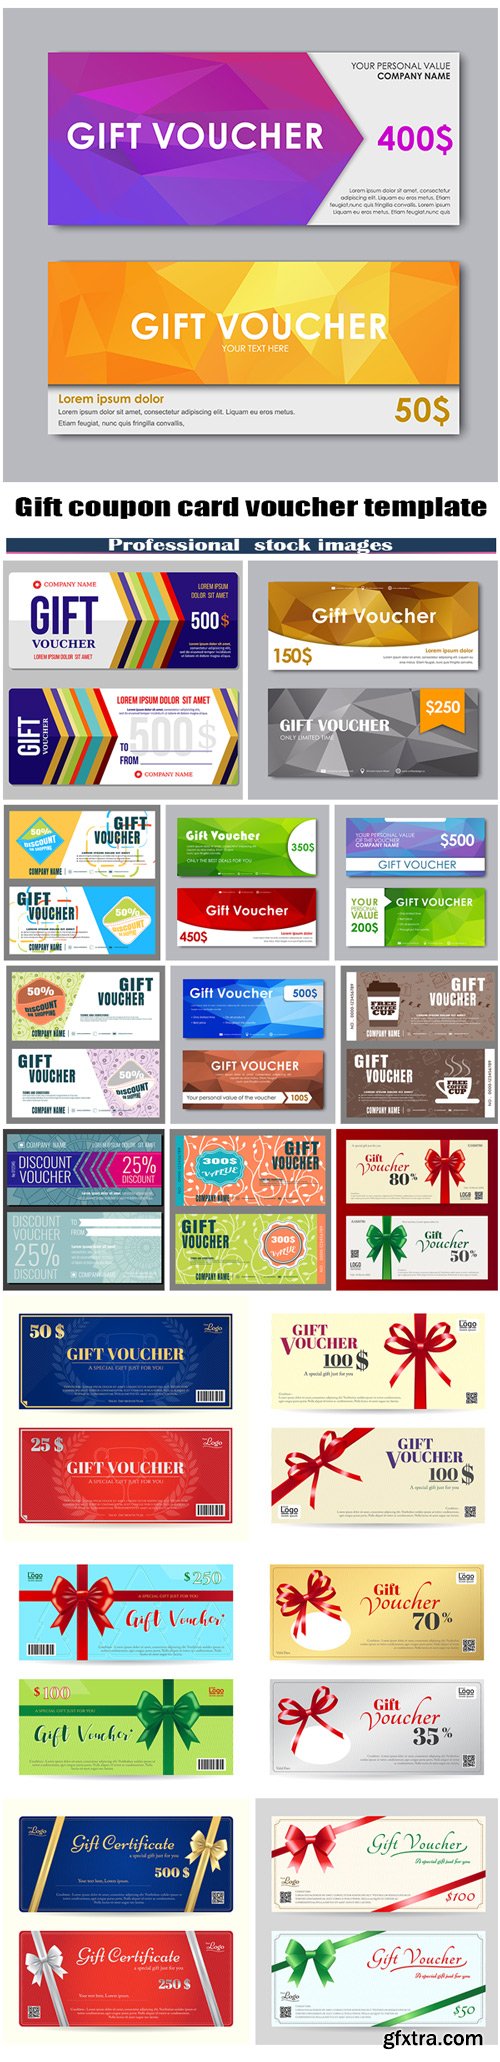 Gift coupon card voucher template